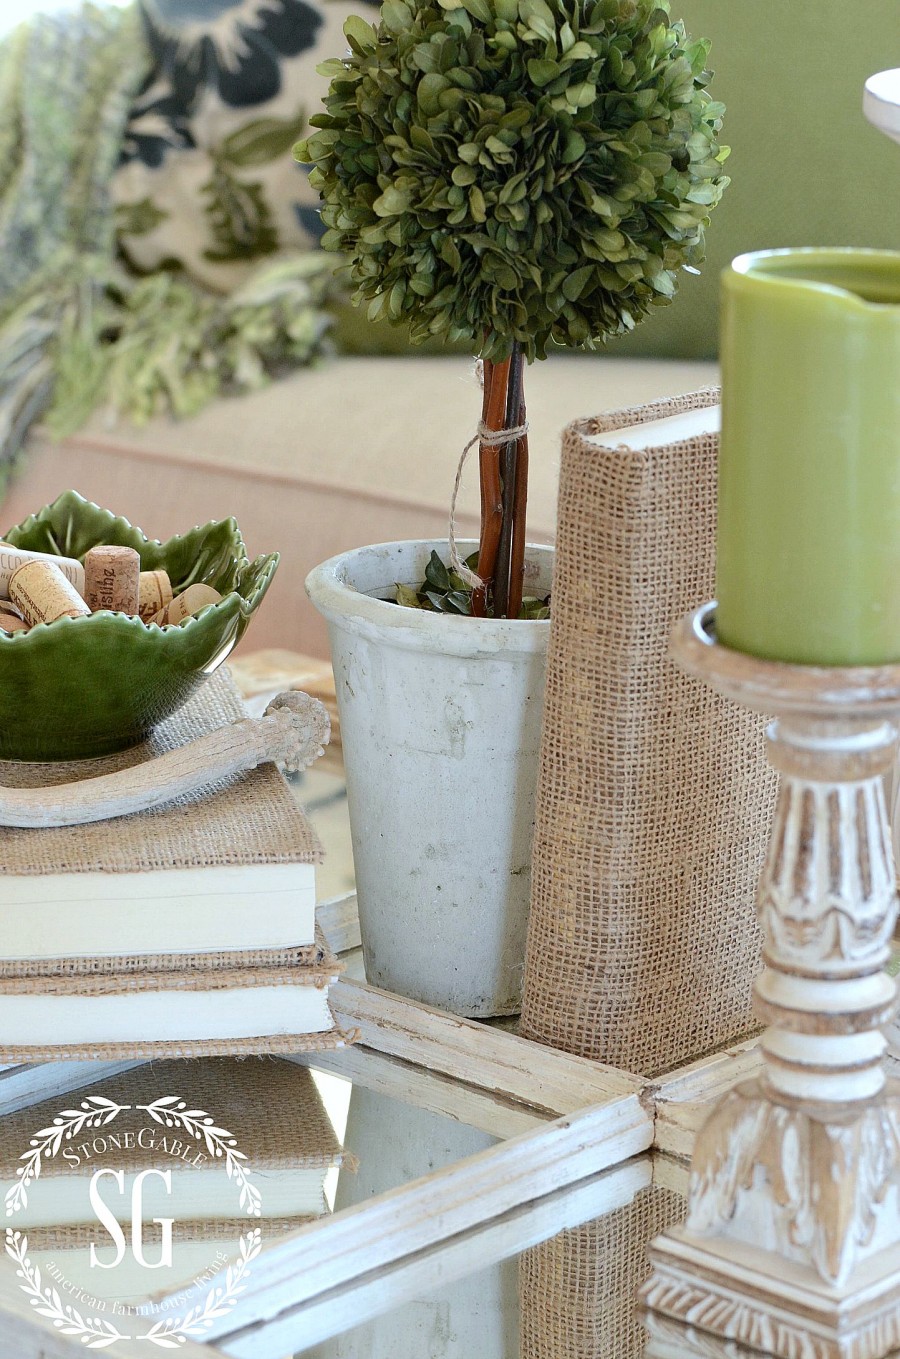 USING BURLAP IN HOME DECOR-Burlap is a classic and here to stay. Here are some helpful tips for decorating with it.-stonegableblog.com